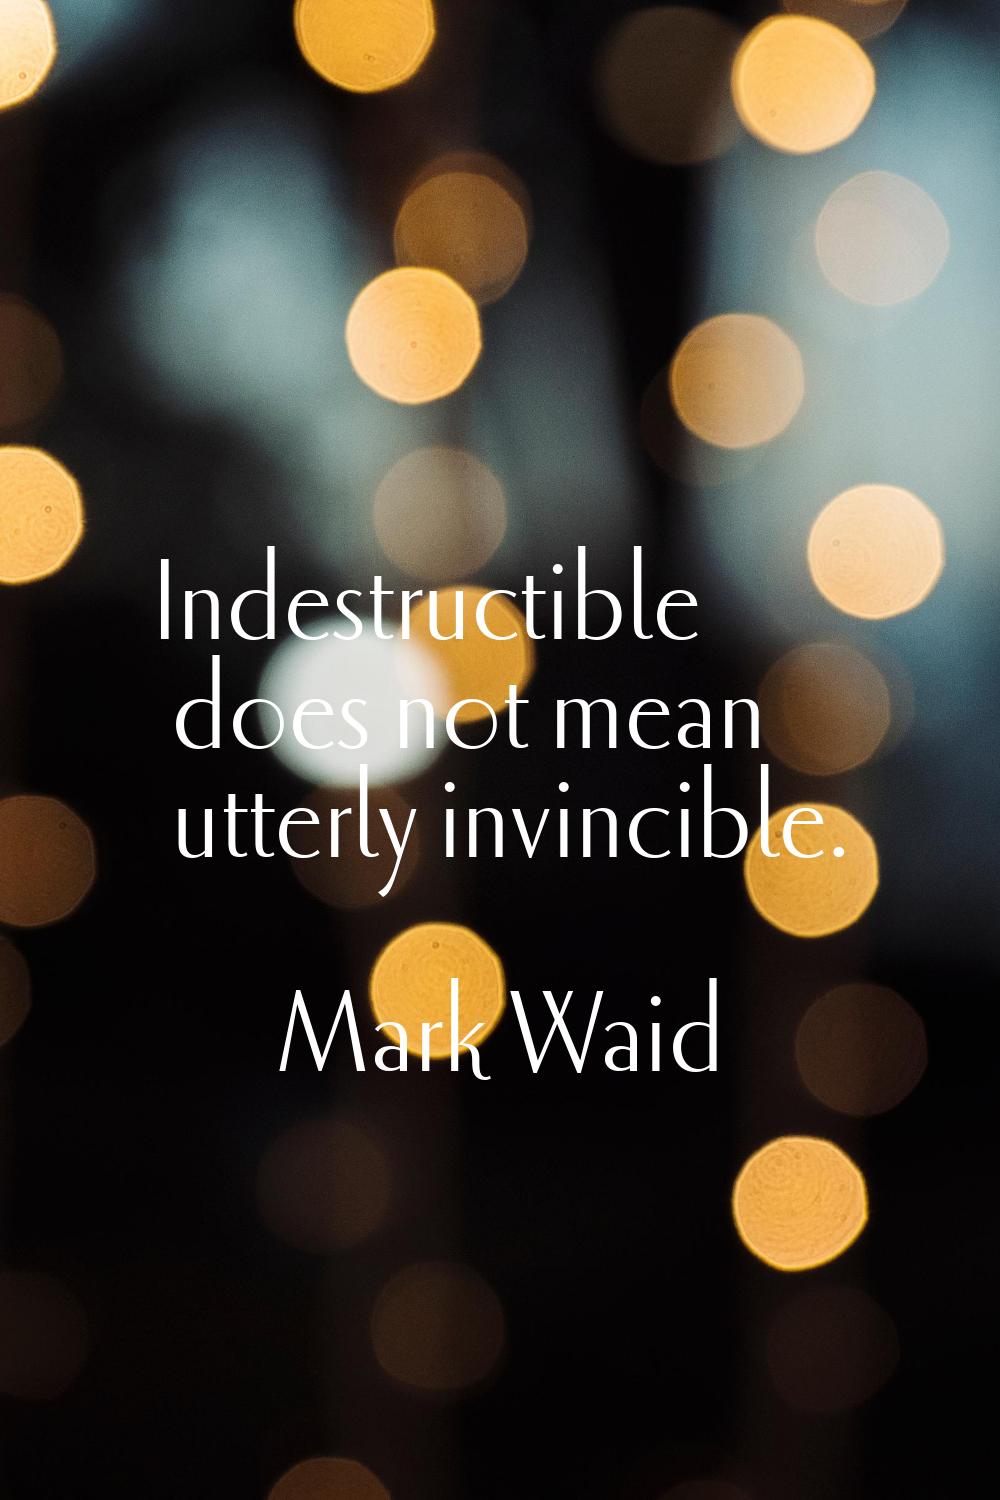 Indestructible does not mean utterly invincible.